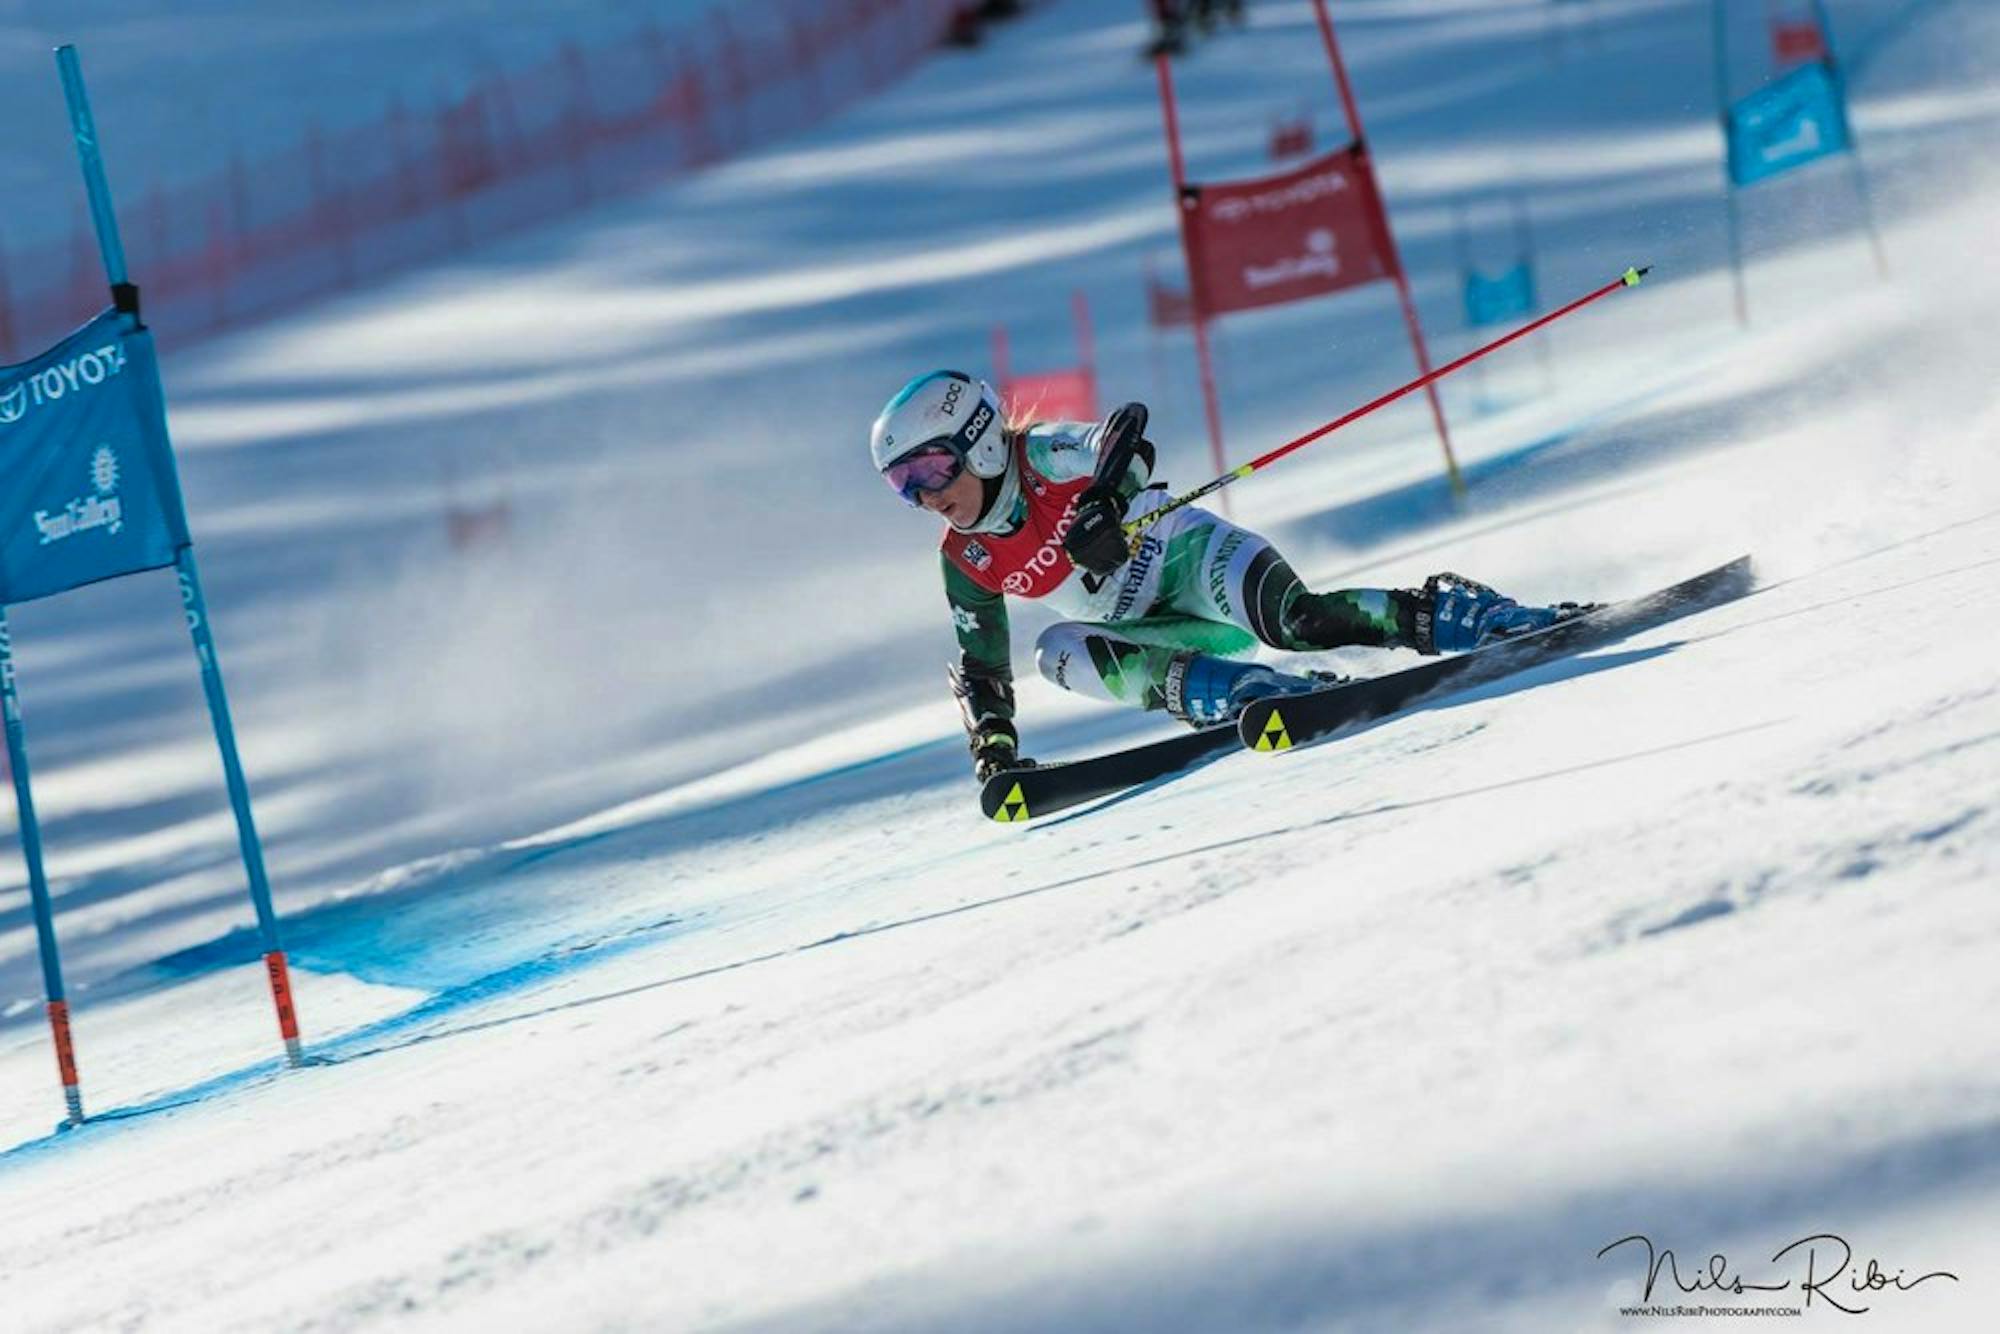 In addition to competing for Dartmouth her senior year, Foreste Peterson ’18 made her World Cup debut in the FIS World Cup this past fall.